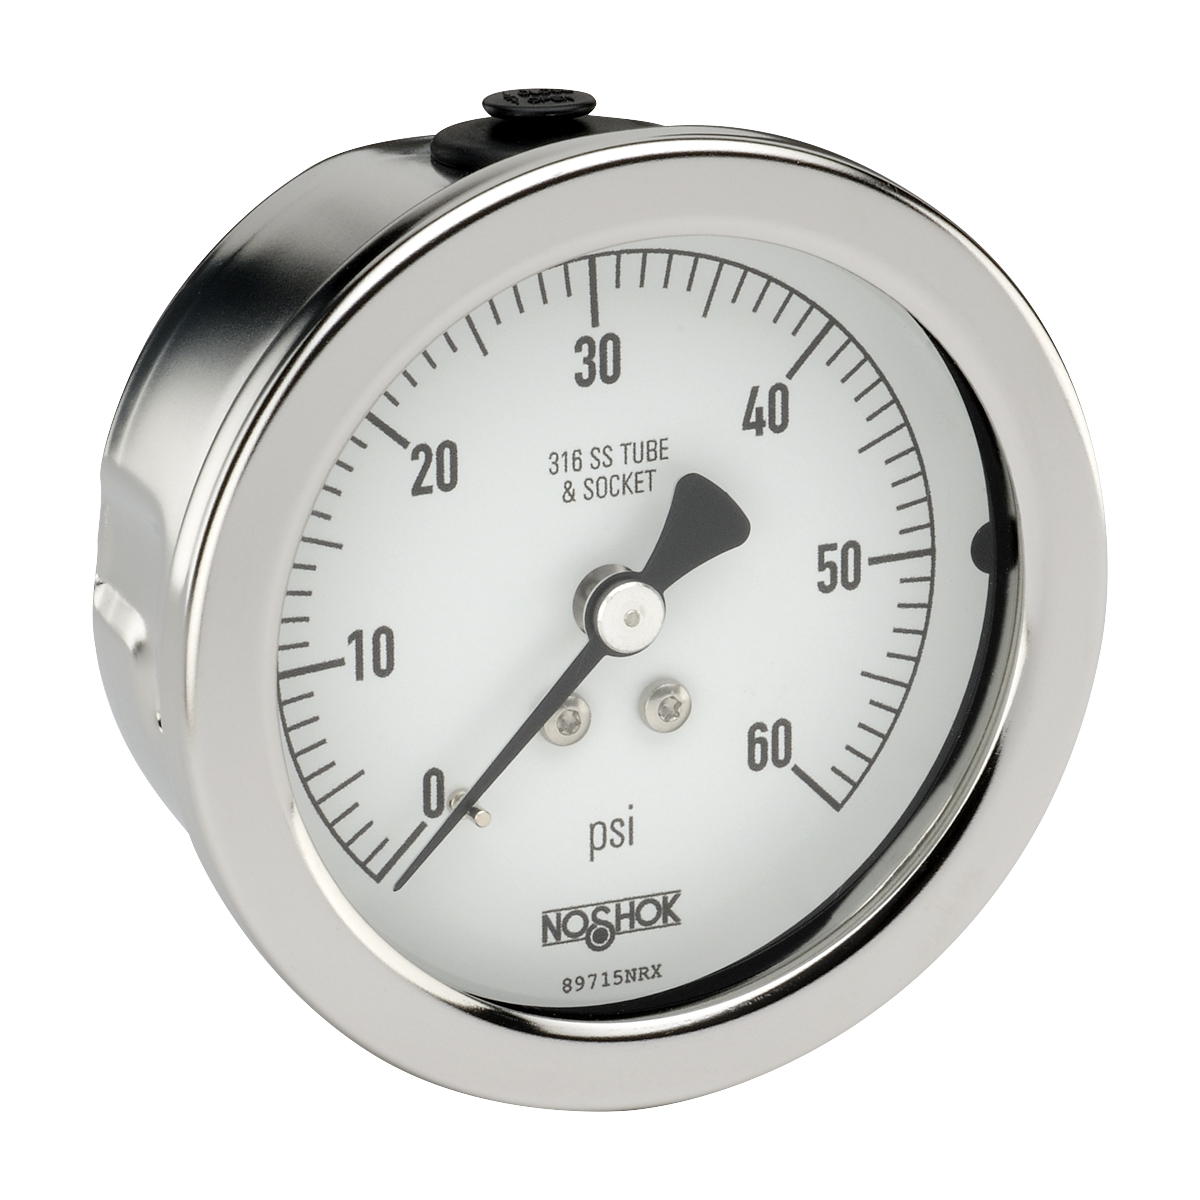 25-510-10000-psi/kPa-SPMC 400/500 Series All Stainless Steel Dry and Liquid Filled Pressure Gauges